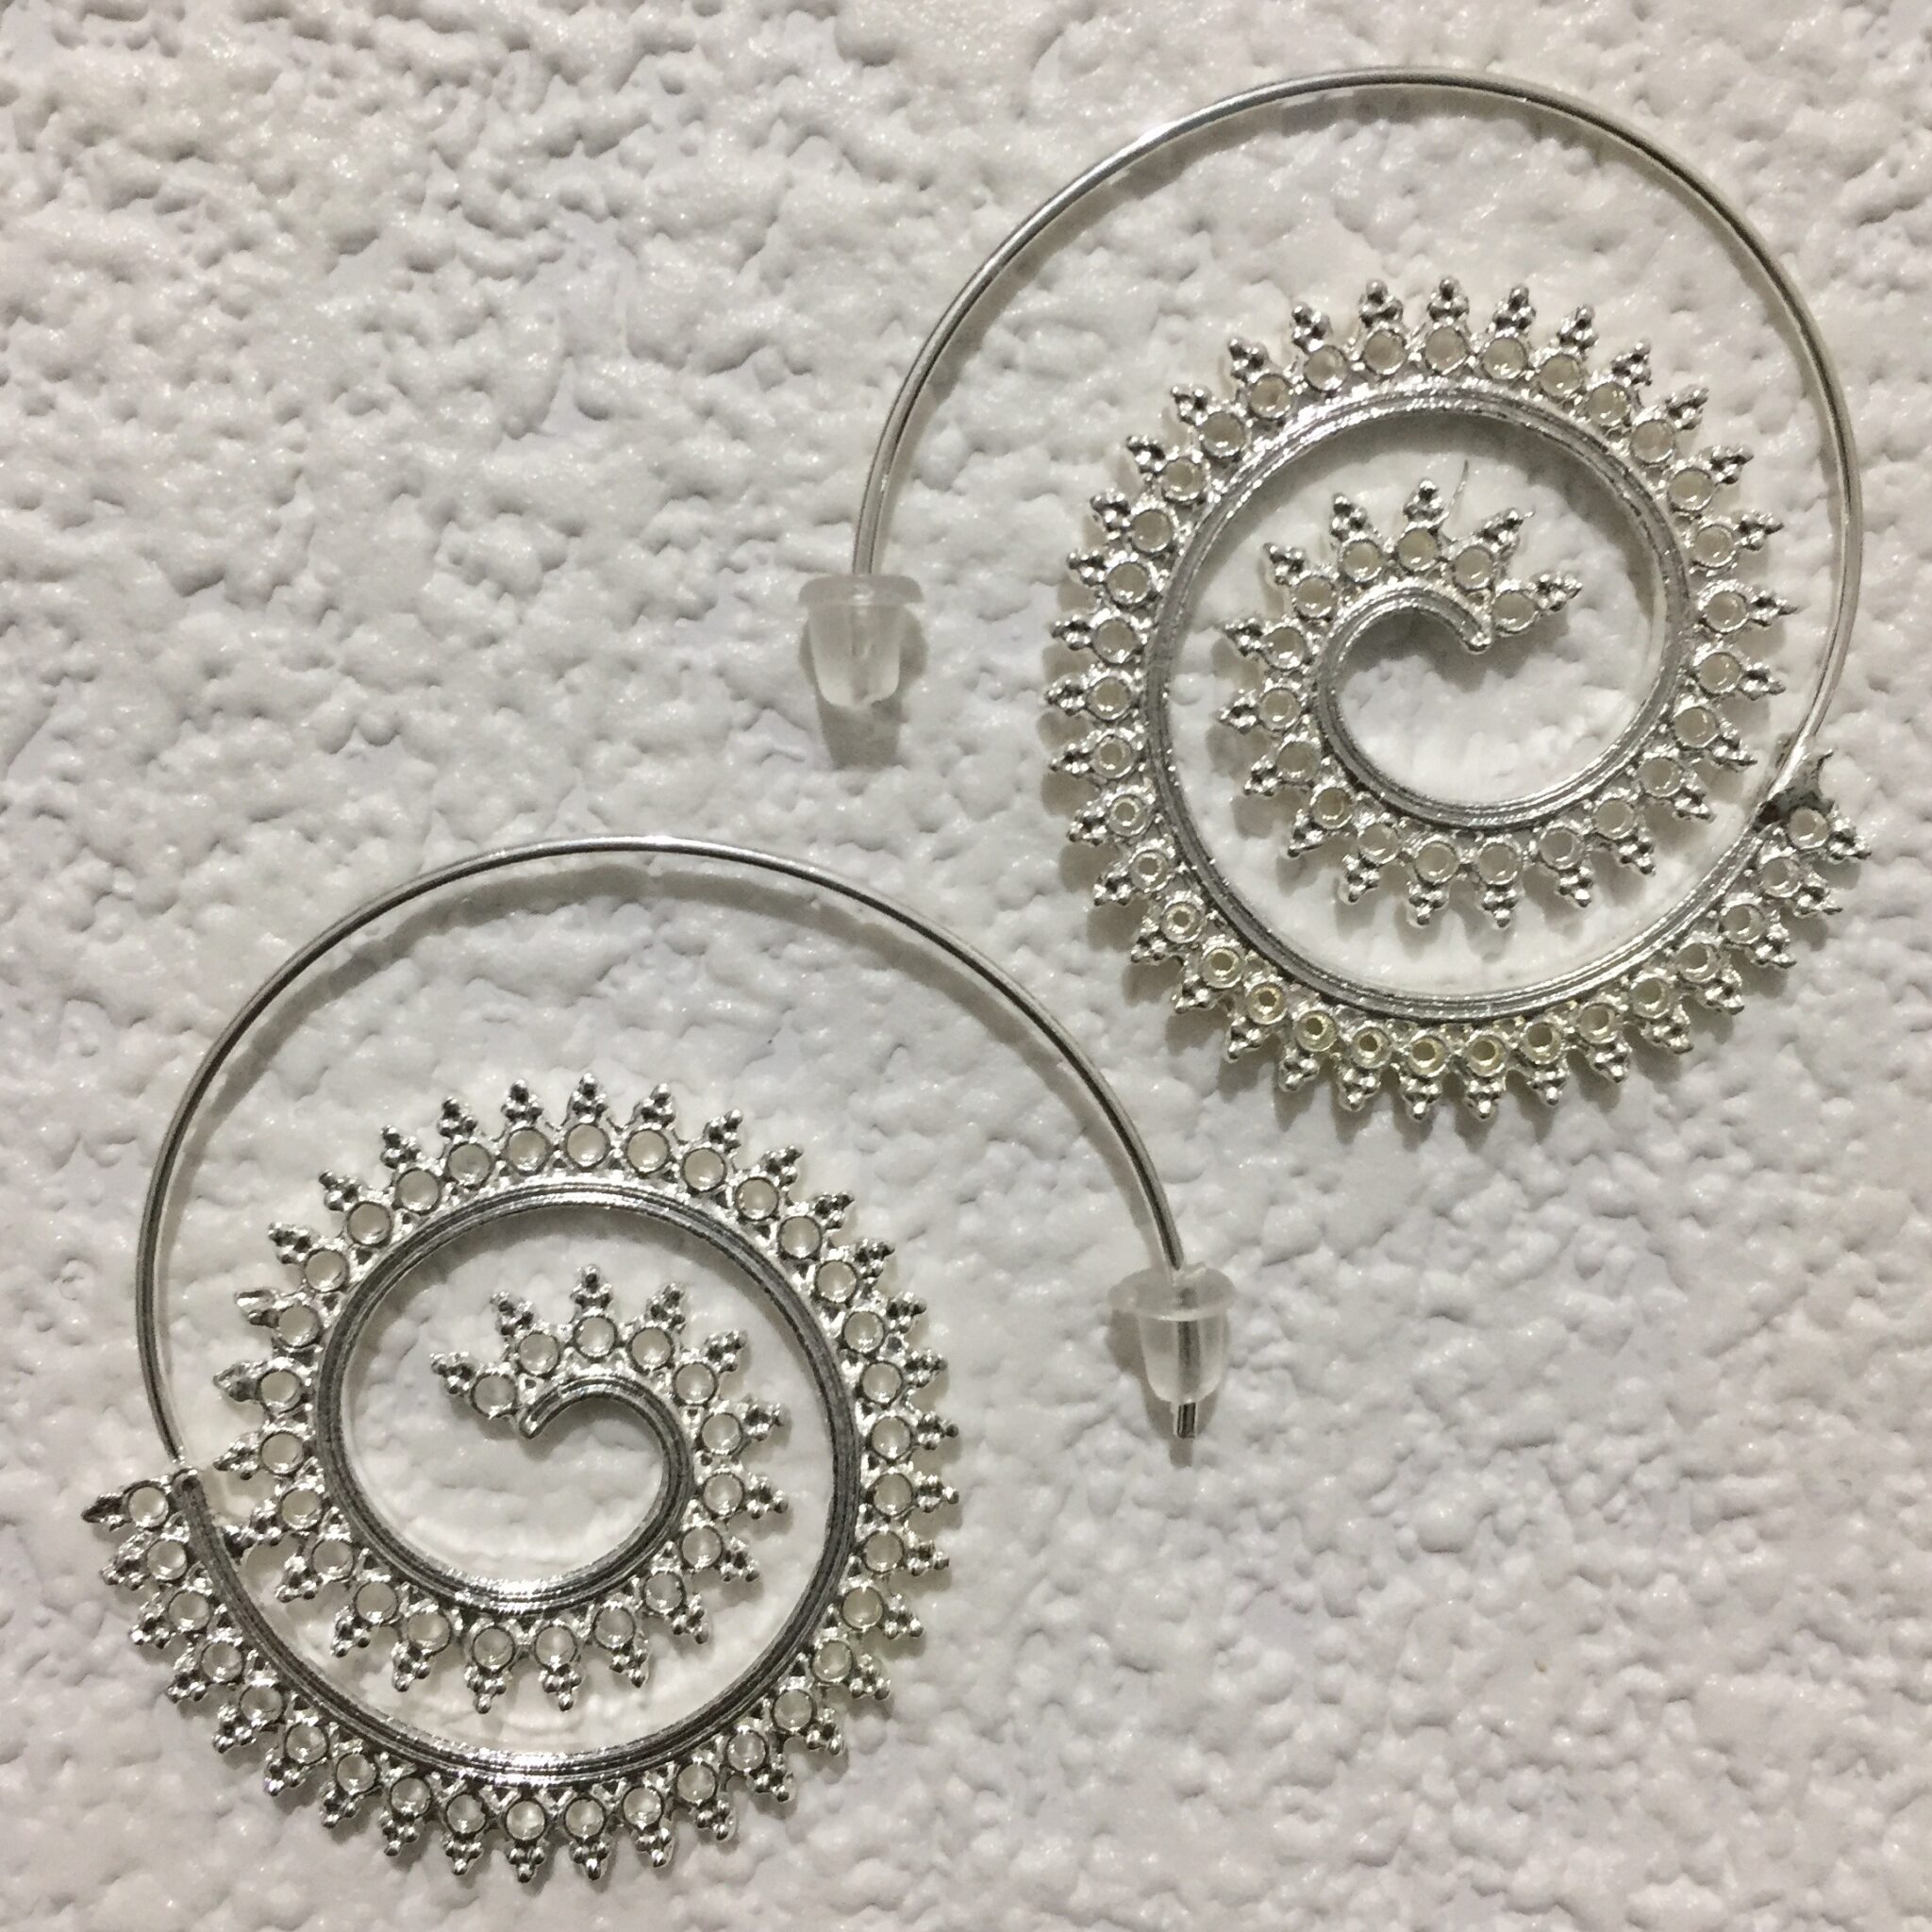 Gorgeous pair of Silver Plated Tribal Ethnic Twist Spiral Hippy Boho Festival Earrings - Style 21